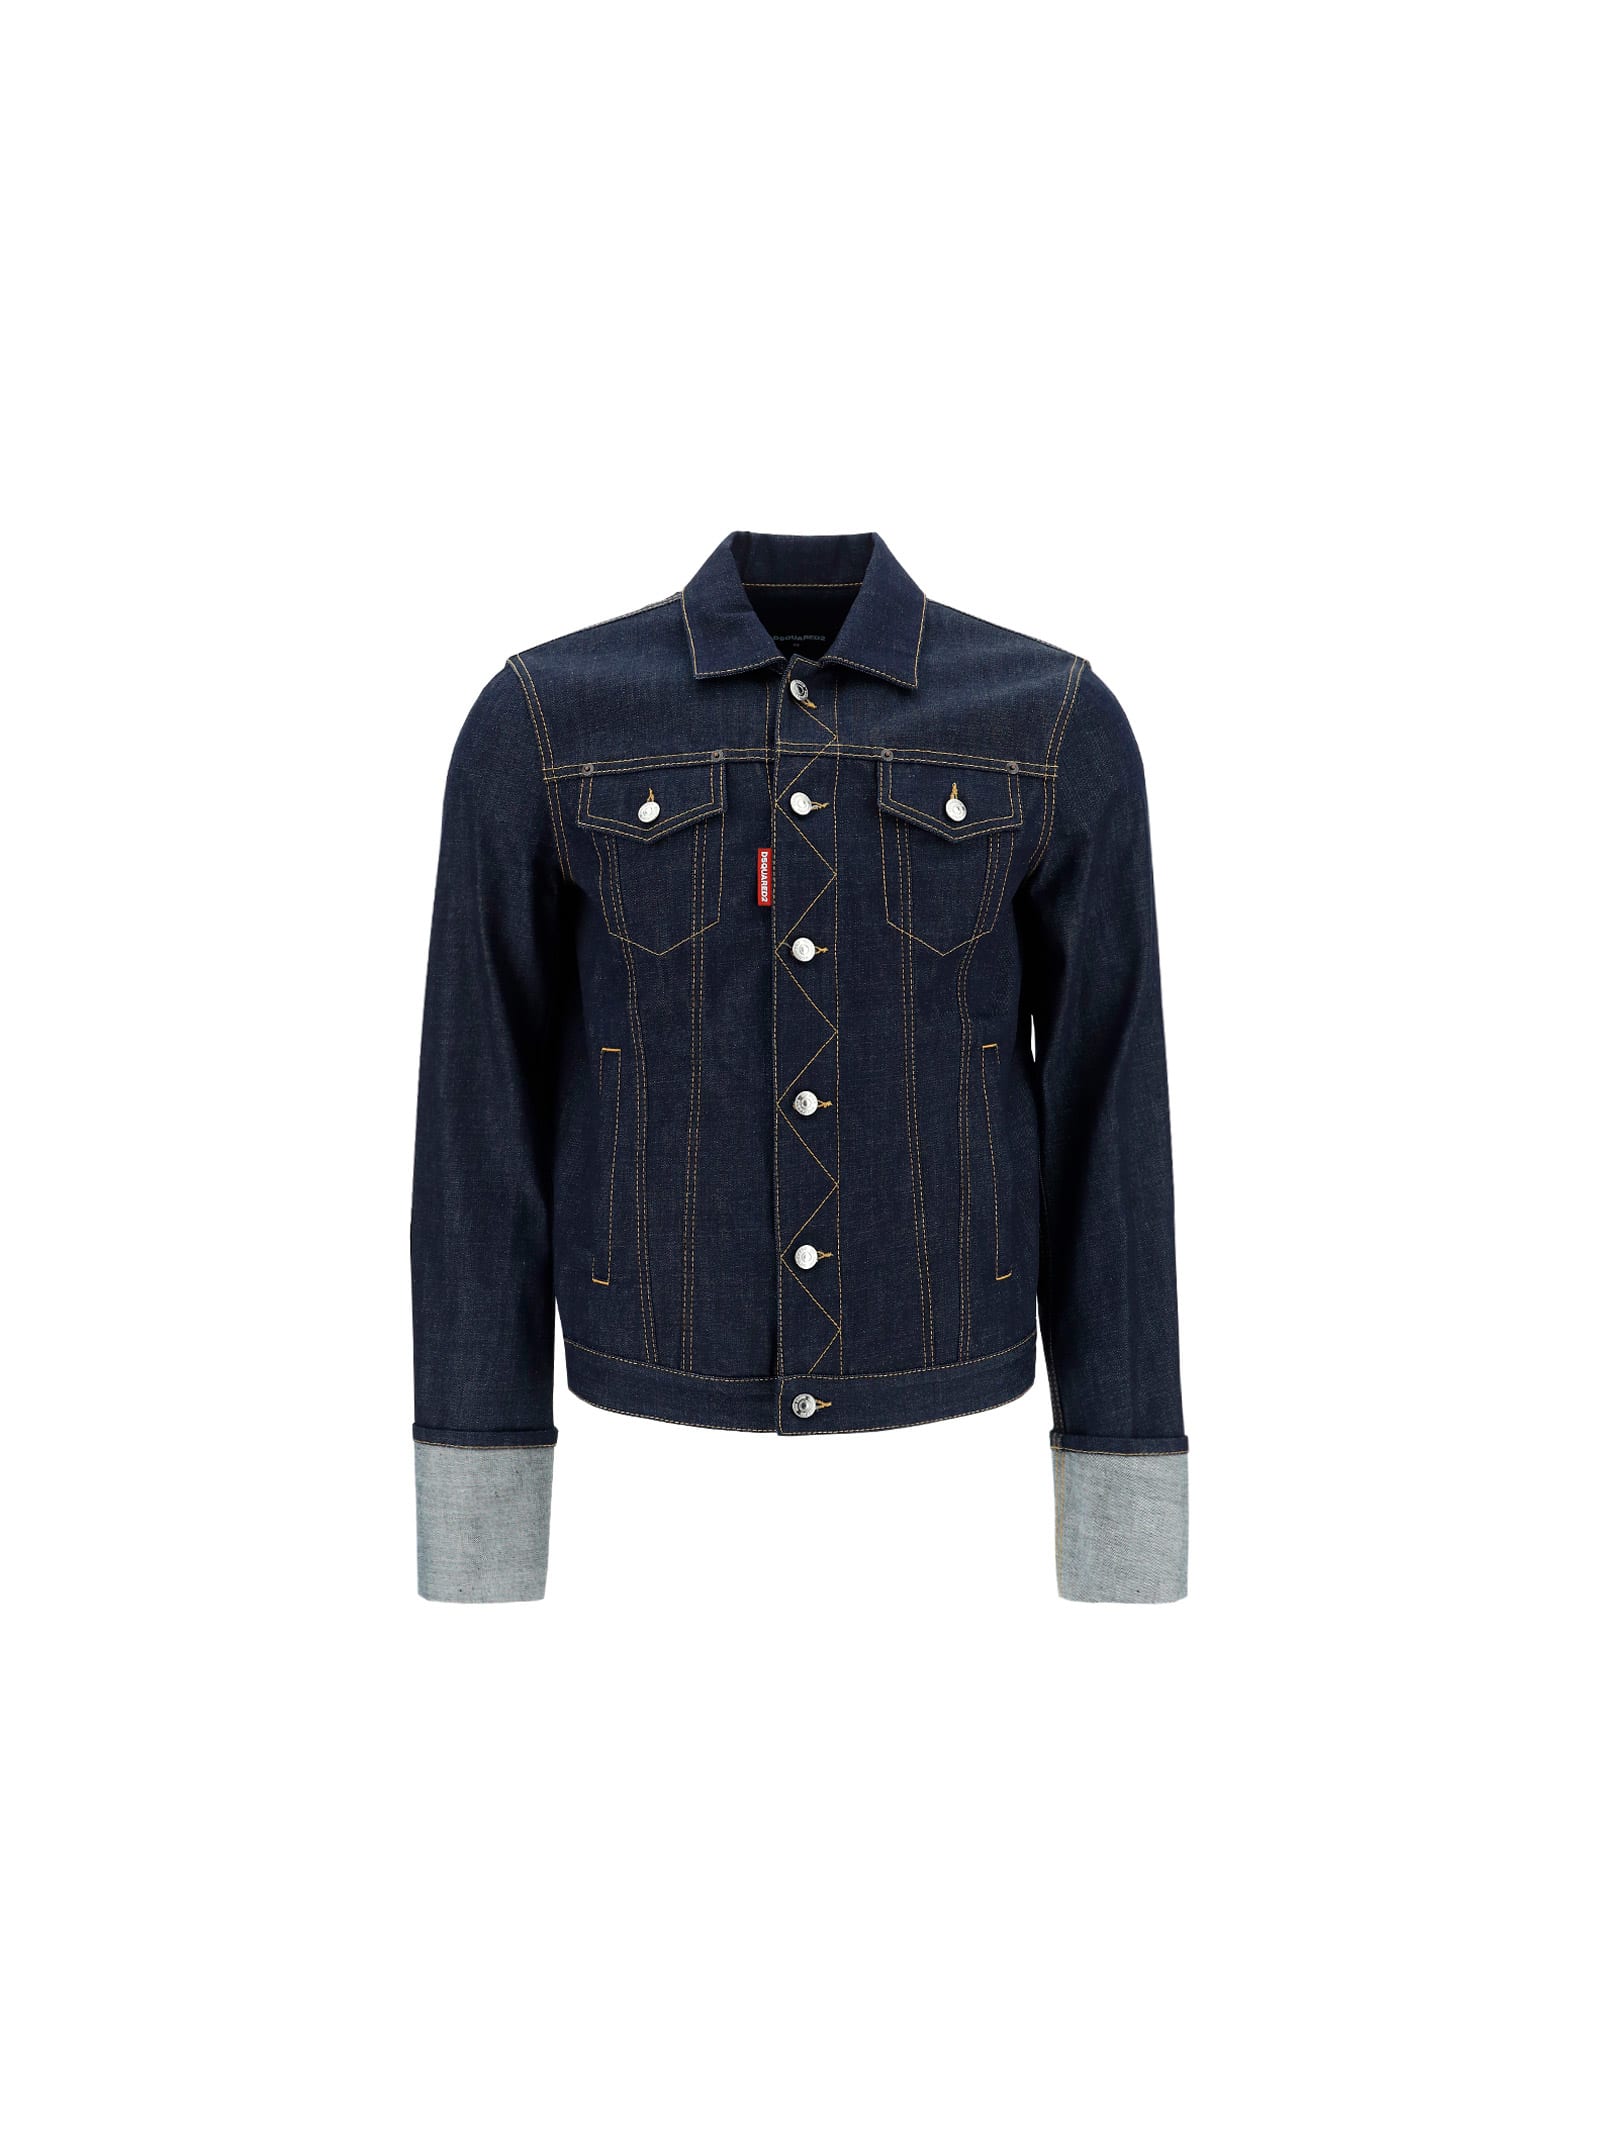 Dsquared2 Denim Jacket By Dsquared